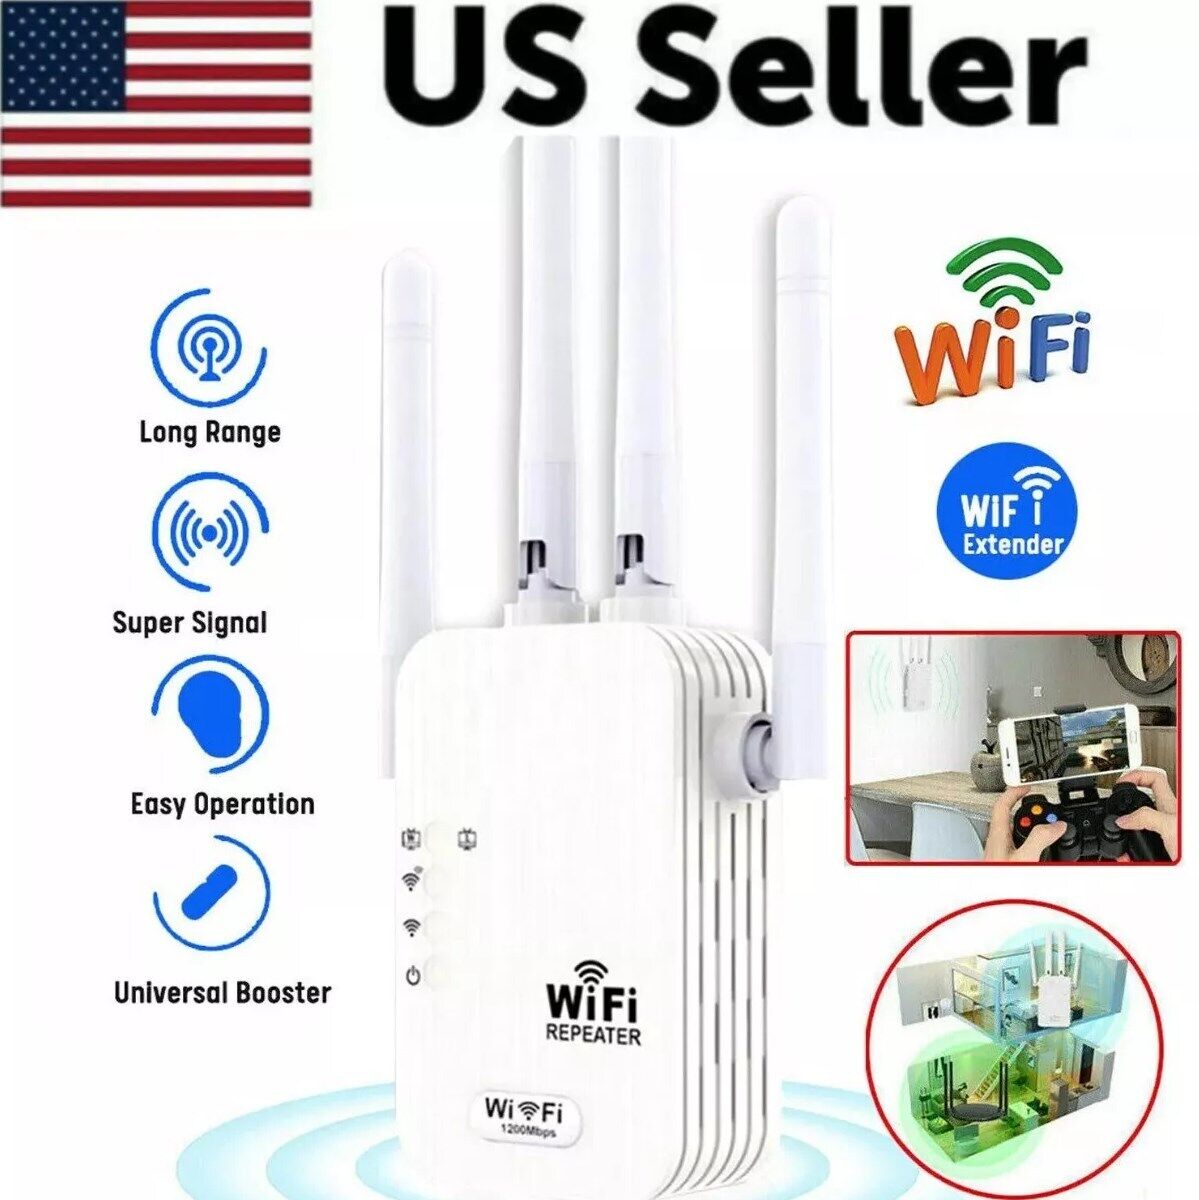 5G 2.4G 1200Mbps WiFi Range Extender Repeater Amplifier Router Signal Booster